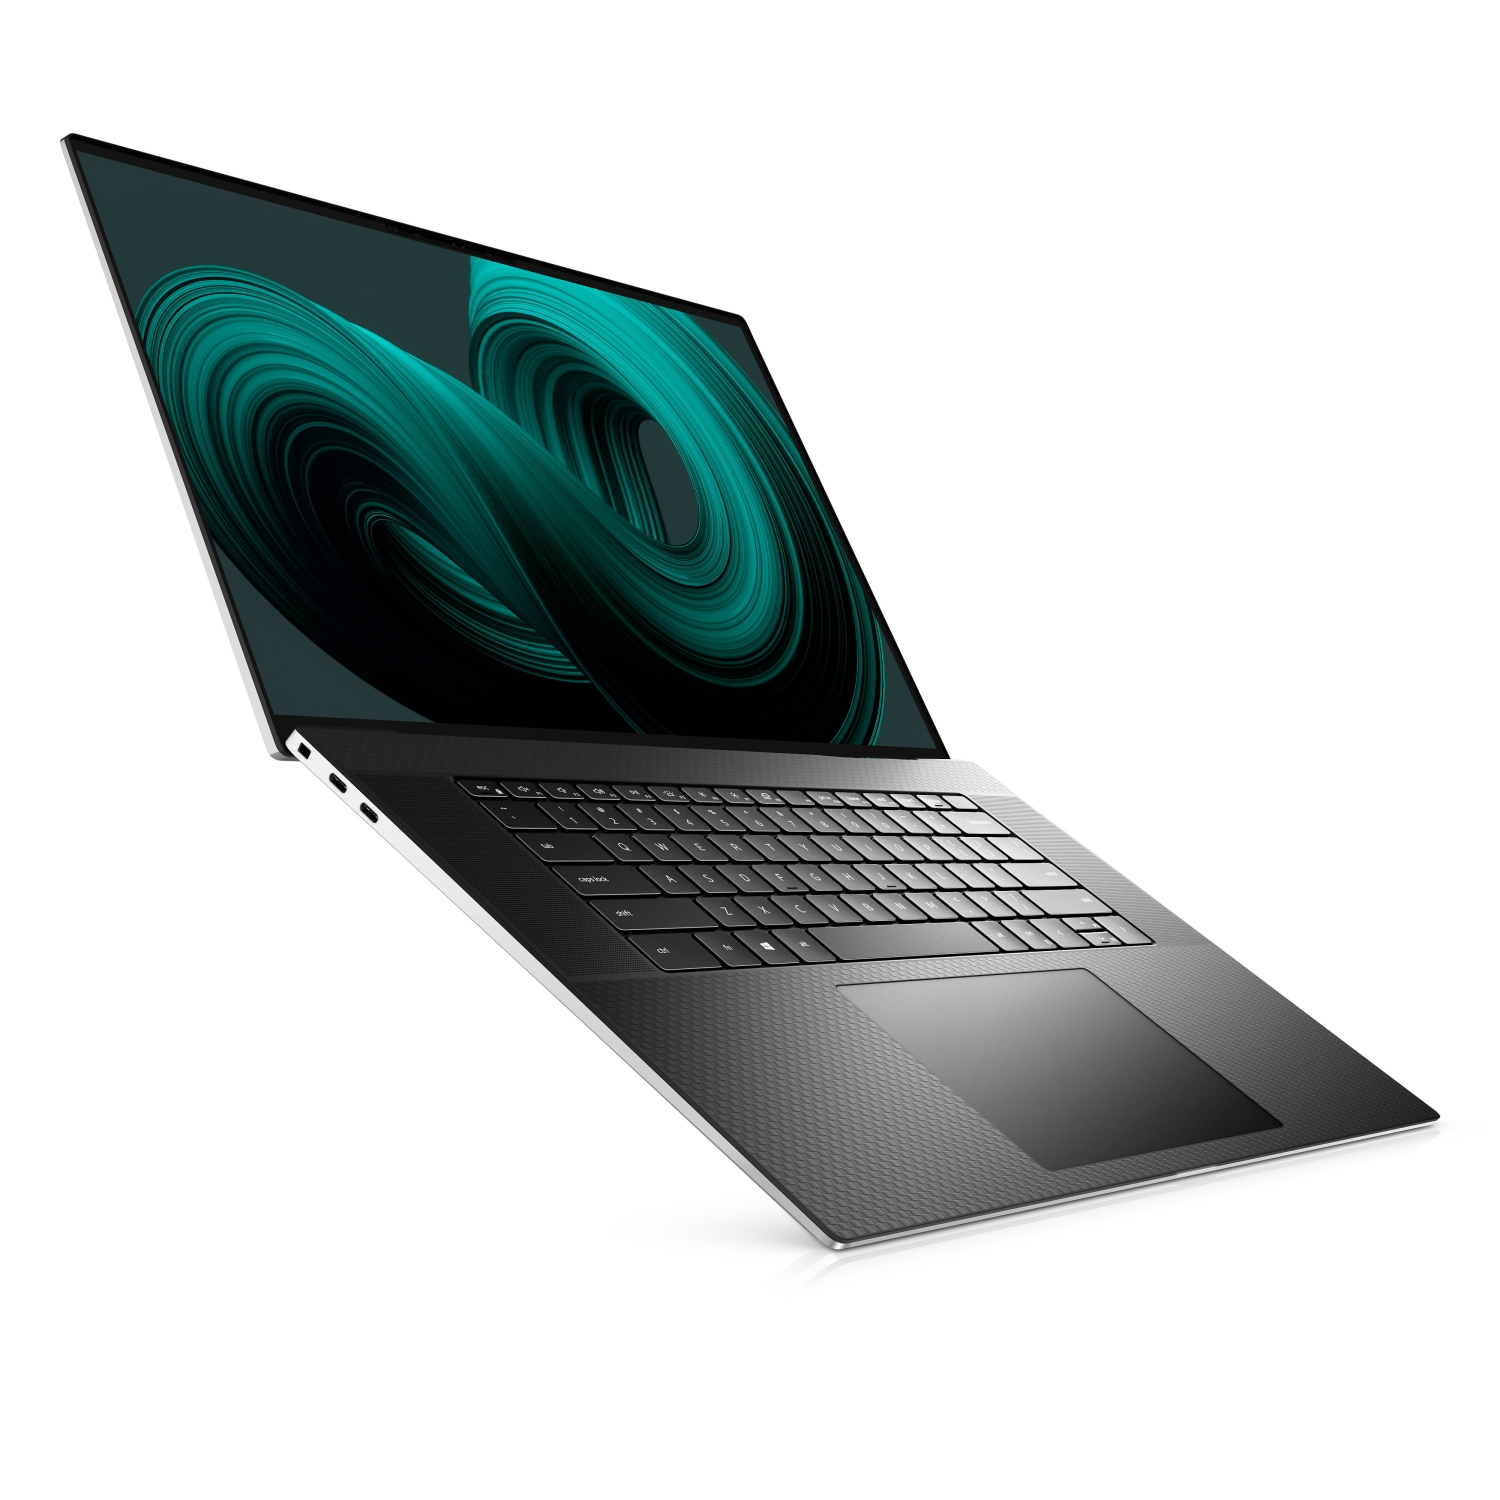 Refurbished (Excellent) – Dell XPS 9710 Laptop (2021) | 17" FHD+ | Core i9 - 512GB SSD - 16GB RAM - RTX 3060 | 8 Cores @ 4.9 GHz - 11th Gen CPU - 12GB GDDR6